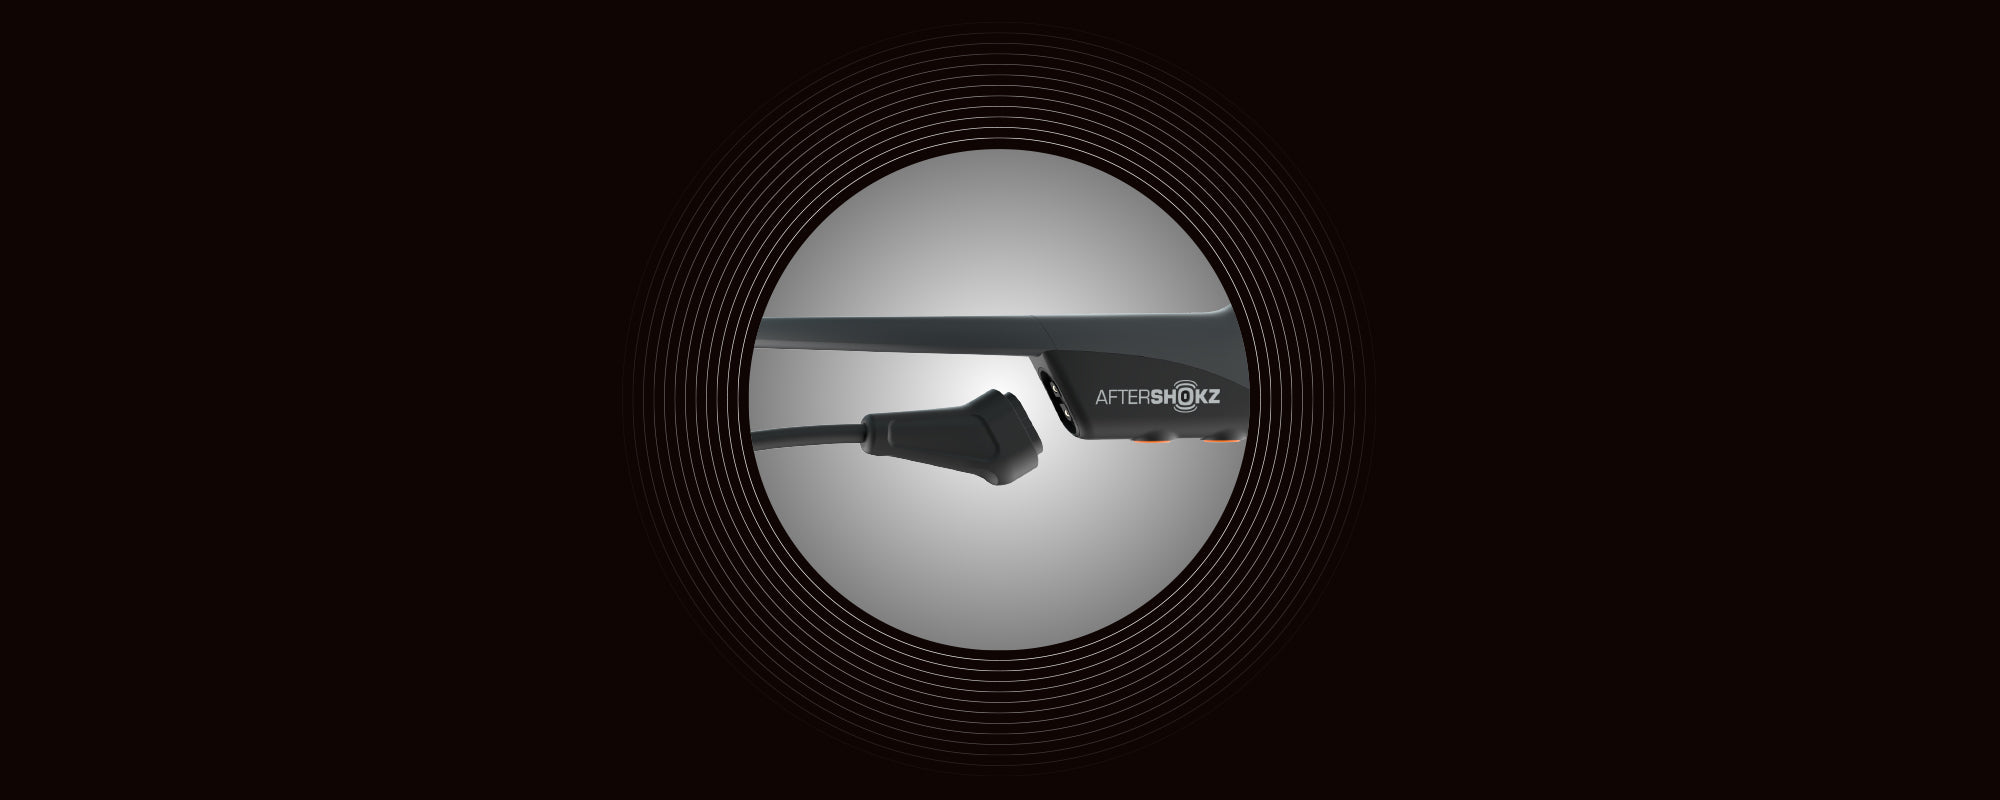 Image of the Magnetic Induction charging port on AfterShokz Aeropex headphones